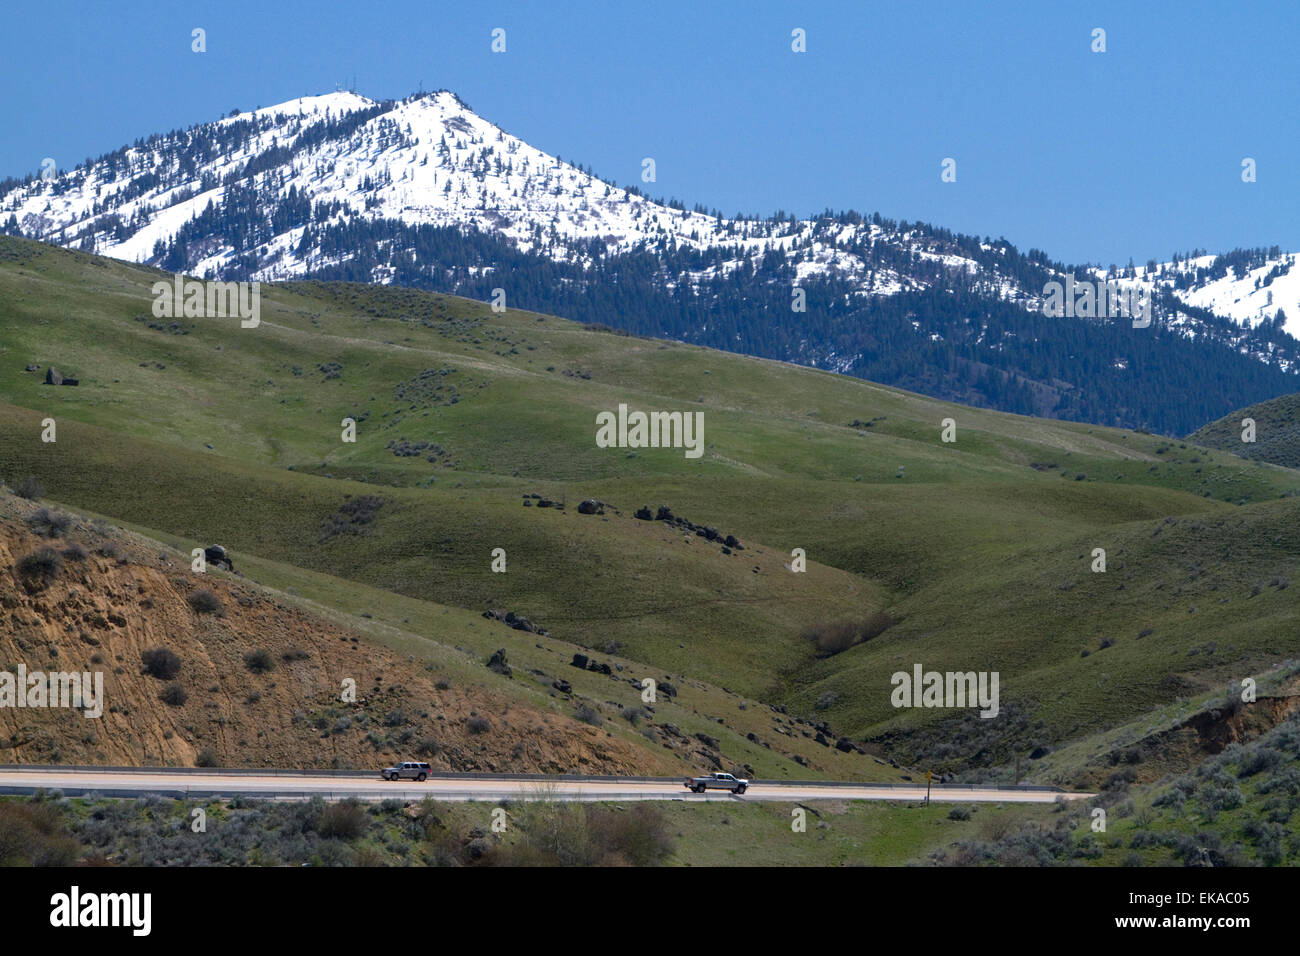 A view of snow covered Shaeffer Butte home to Bogus Basin ski resort along Hwy 55 in Boise County, Idaho, USA. Stock Photo